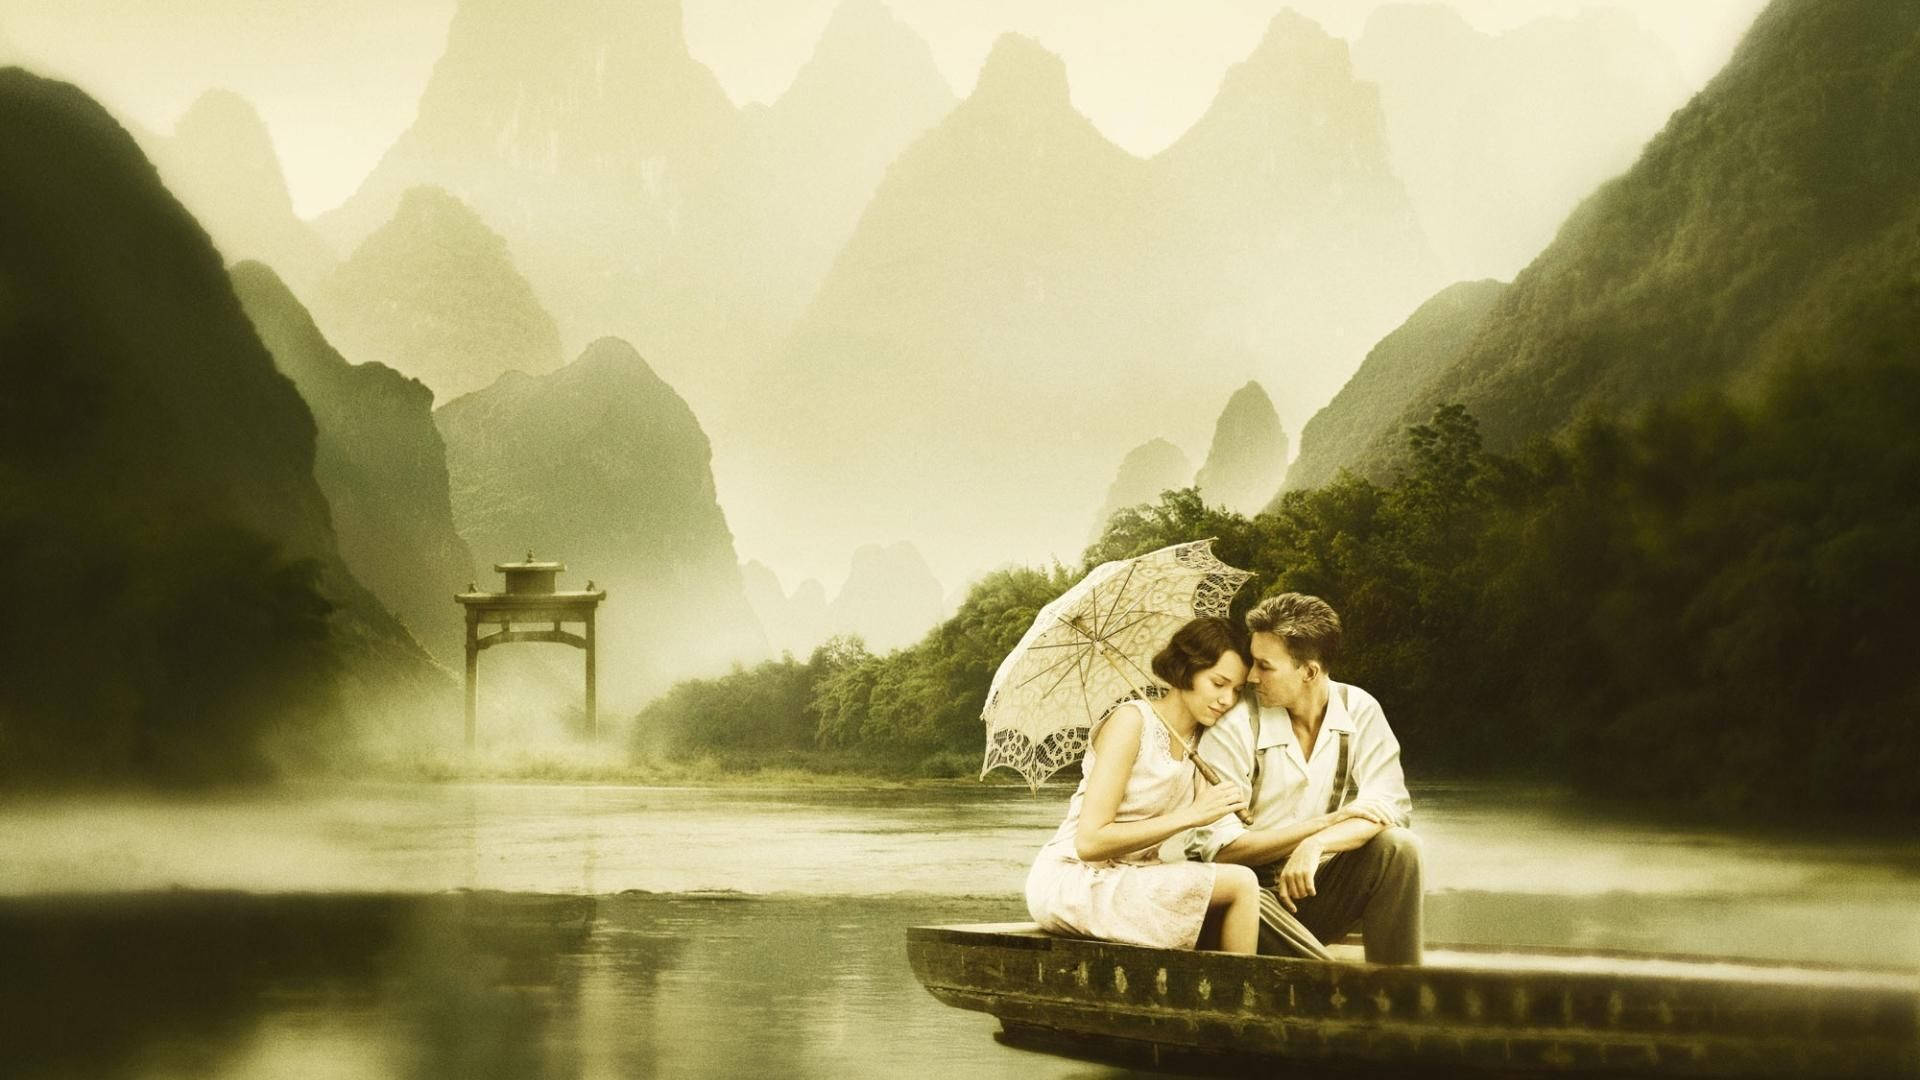 Love Story Of Couple On Boat Wallpaper